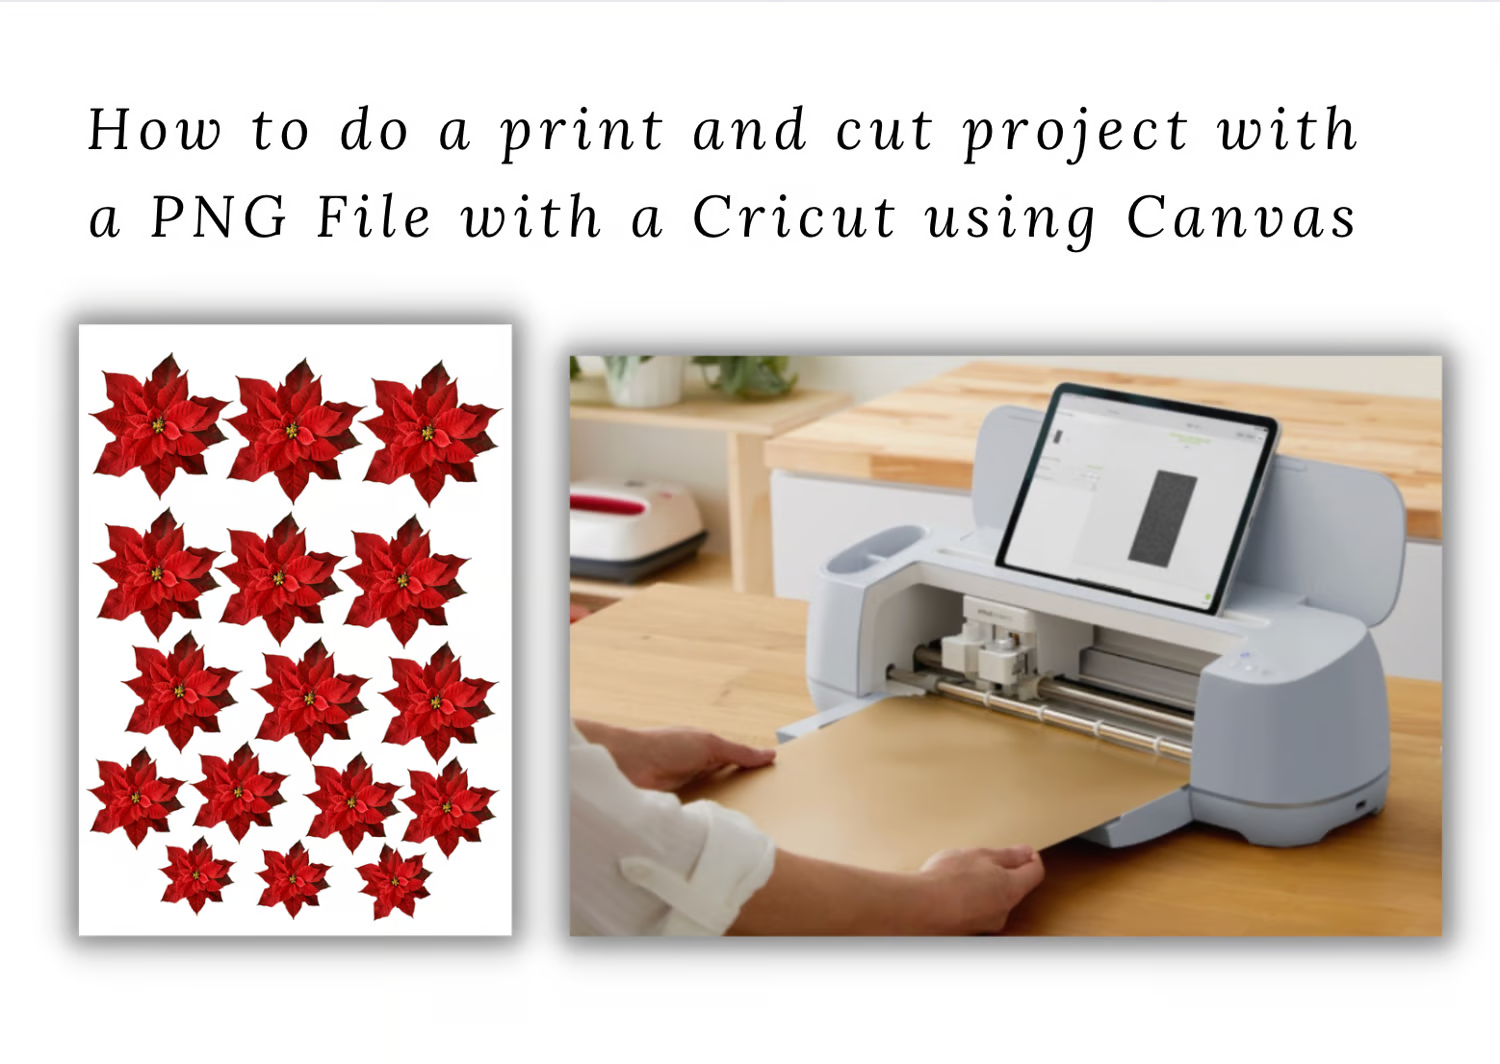 How to do a print and cut project with a PNG file on a Cricut, Cameo, and Brother scan n cut